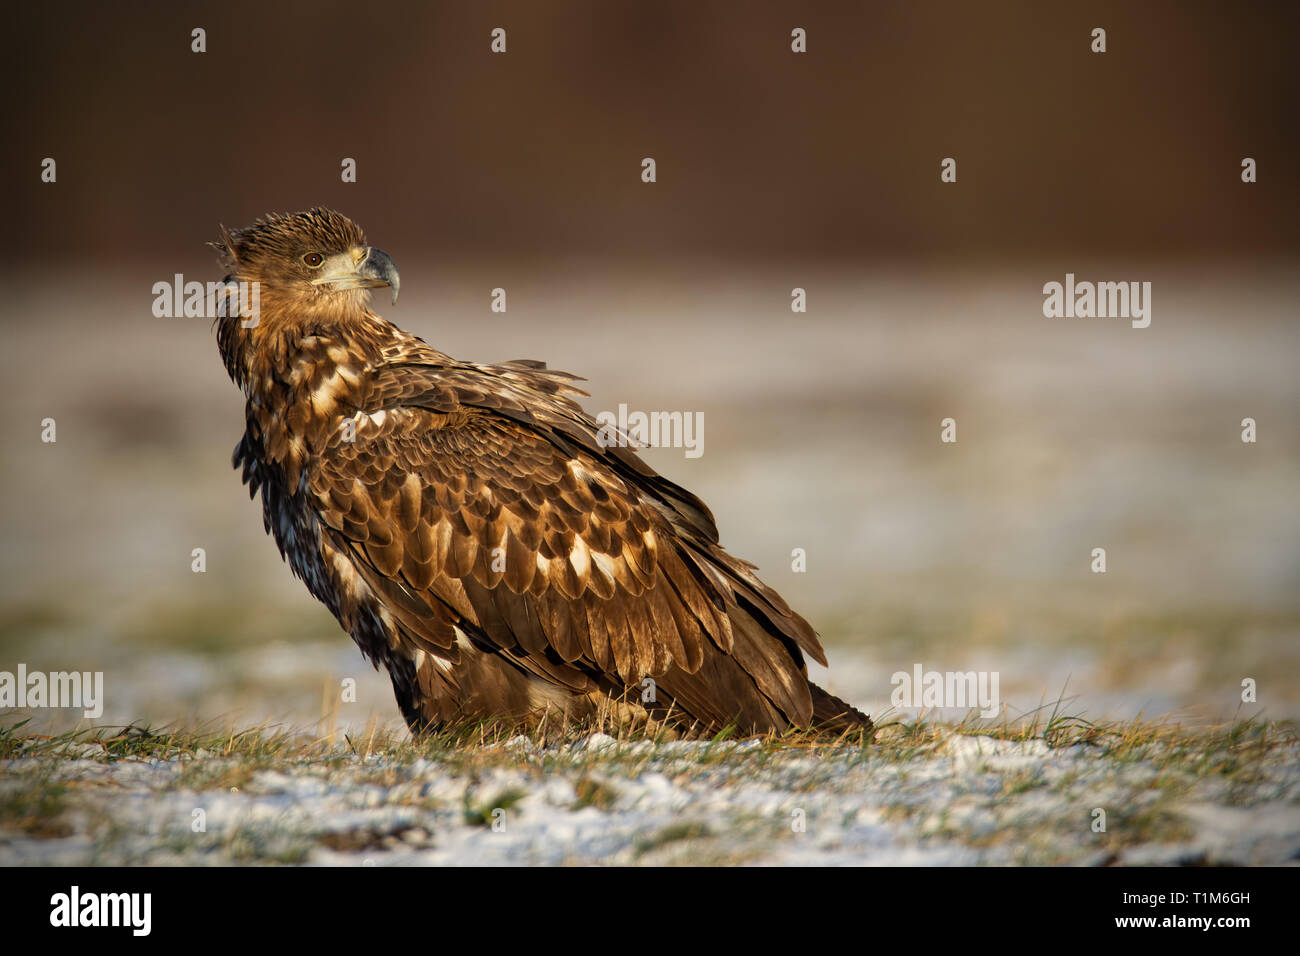 Juvenile white-tailed eagle, haliaeetus albicilla, in winter sitting on a snow covered ground. Wildlife scenery of predator watching with clear blurre Stock Photo